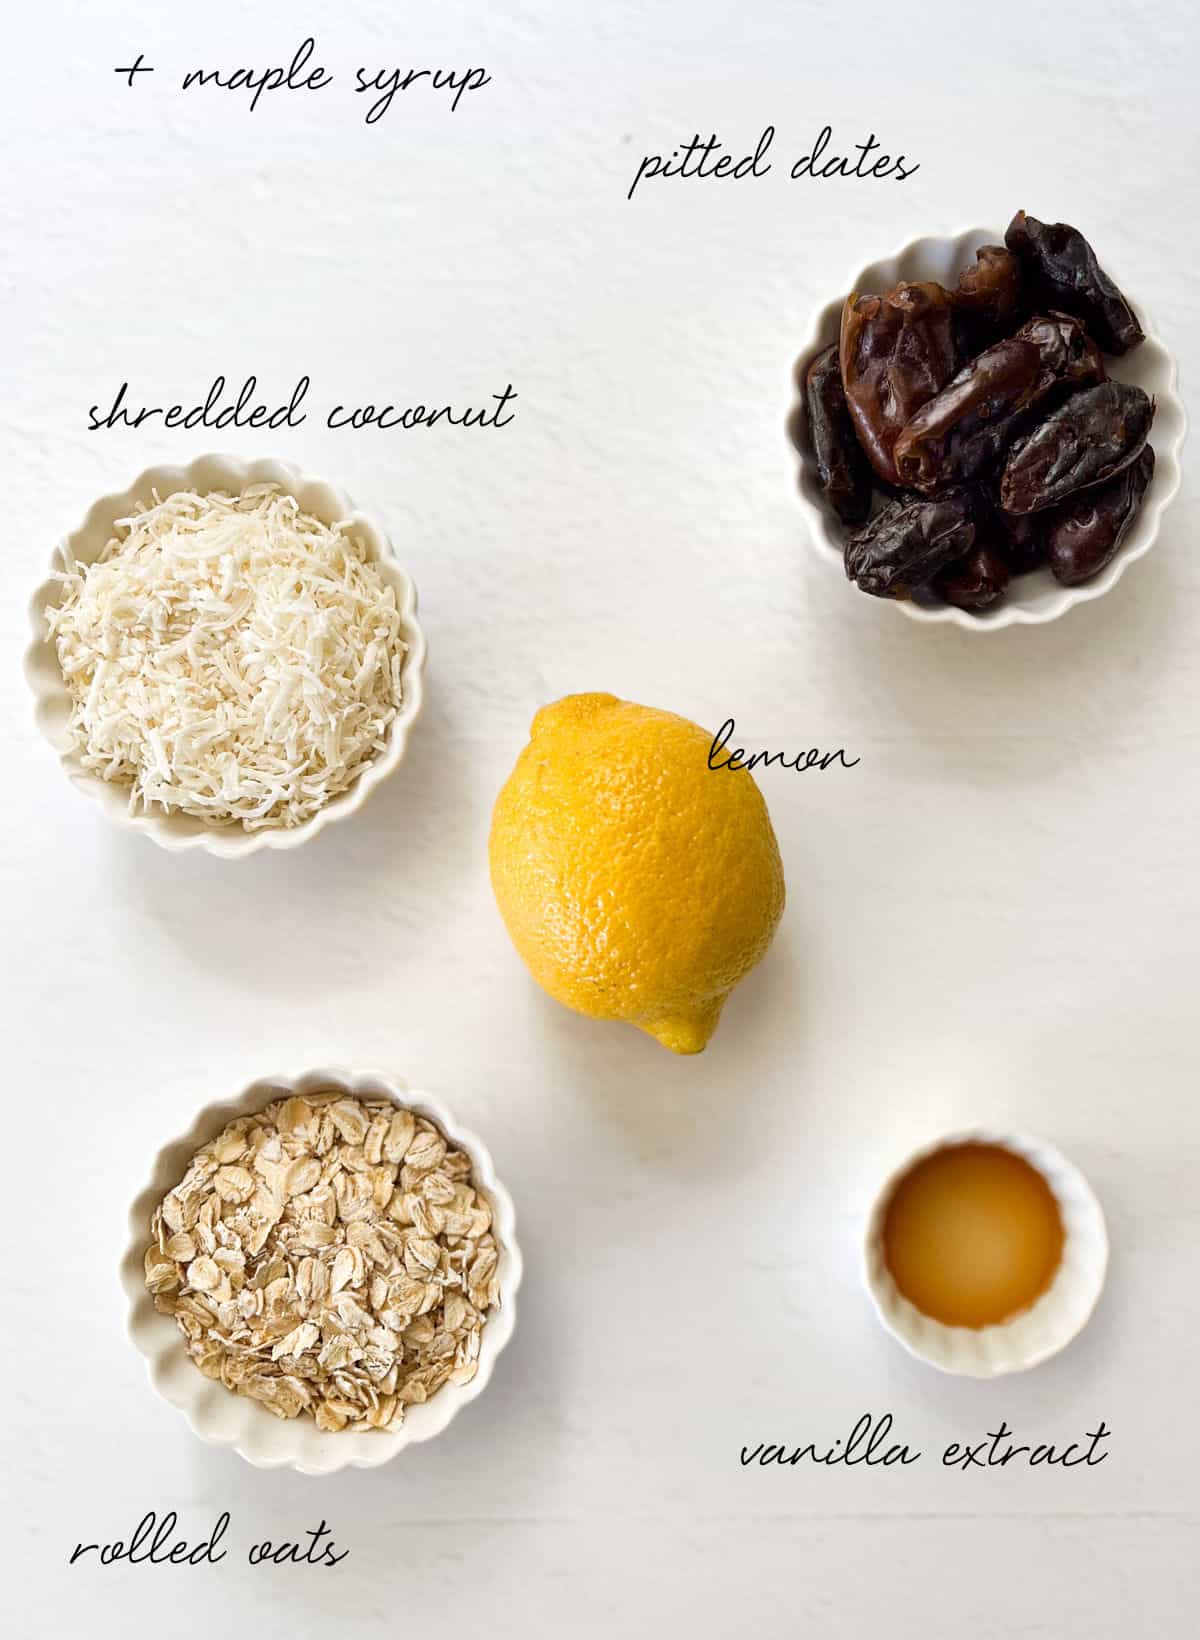 dates, lemon, shredded coconut, rolled oats and vanilla in bowls